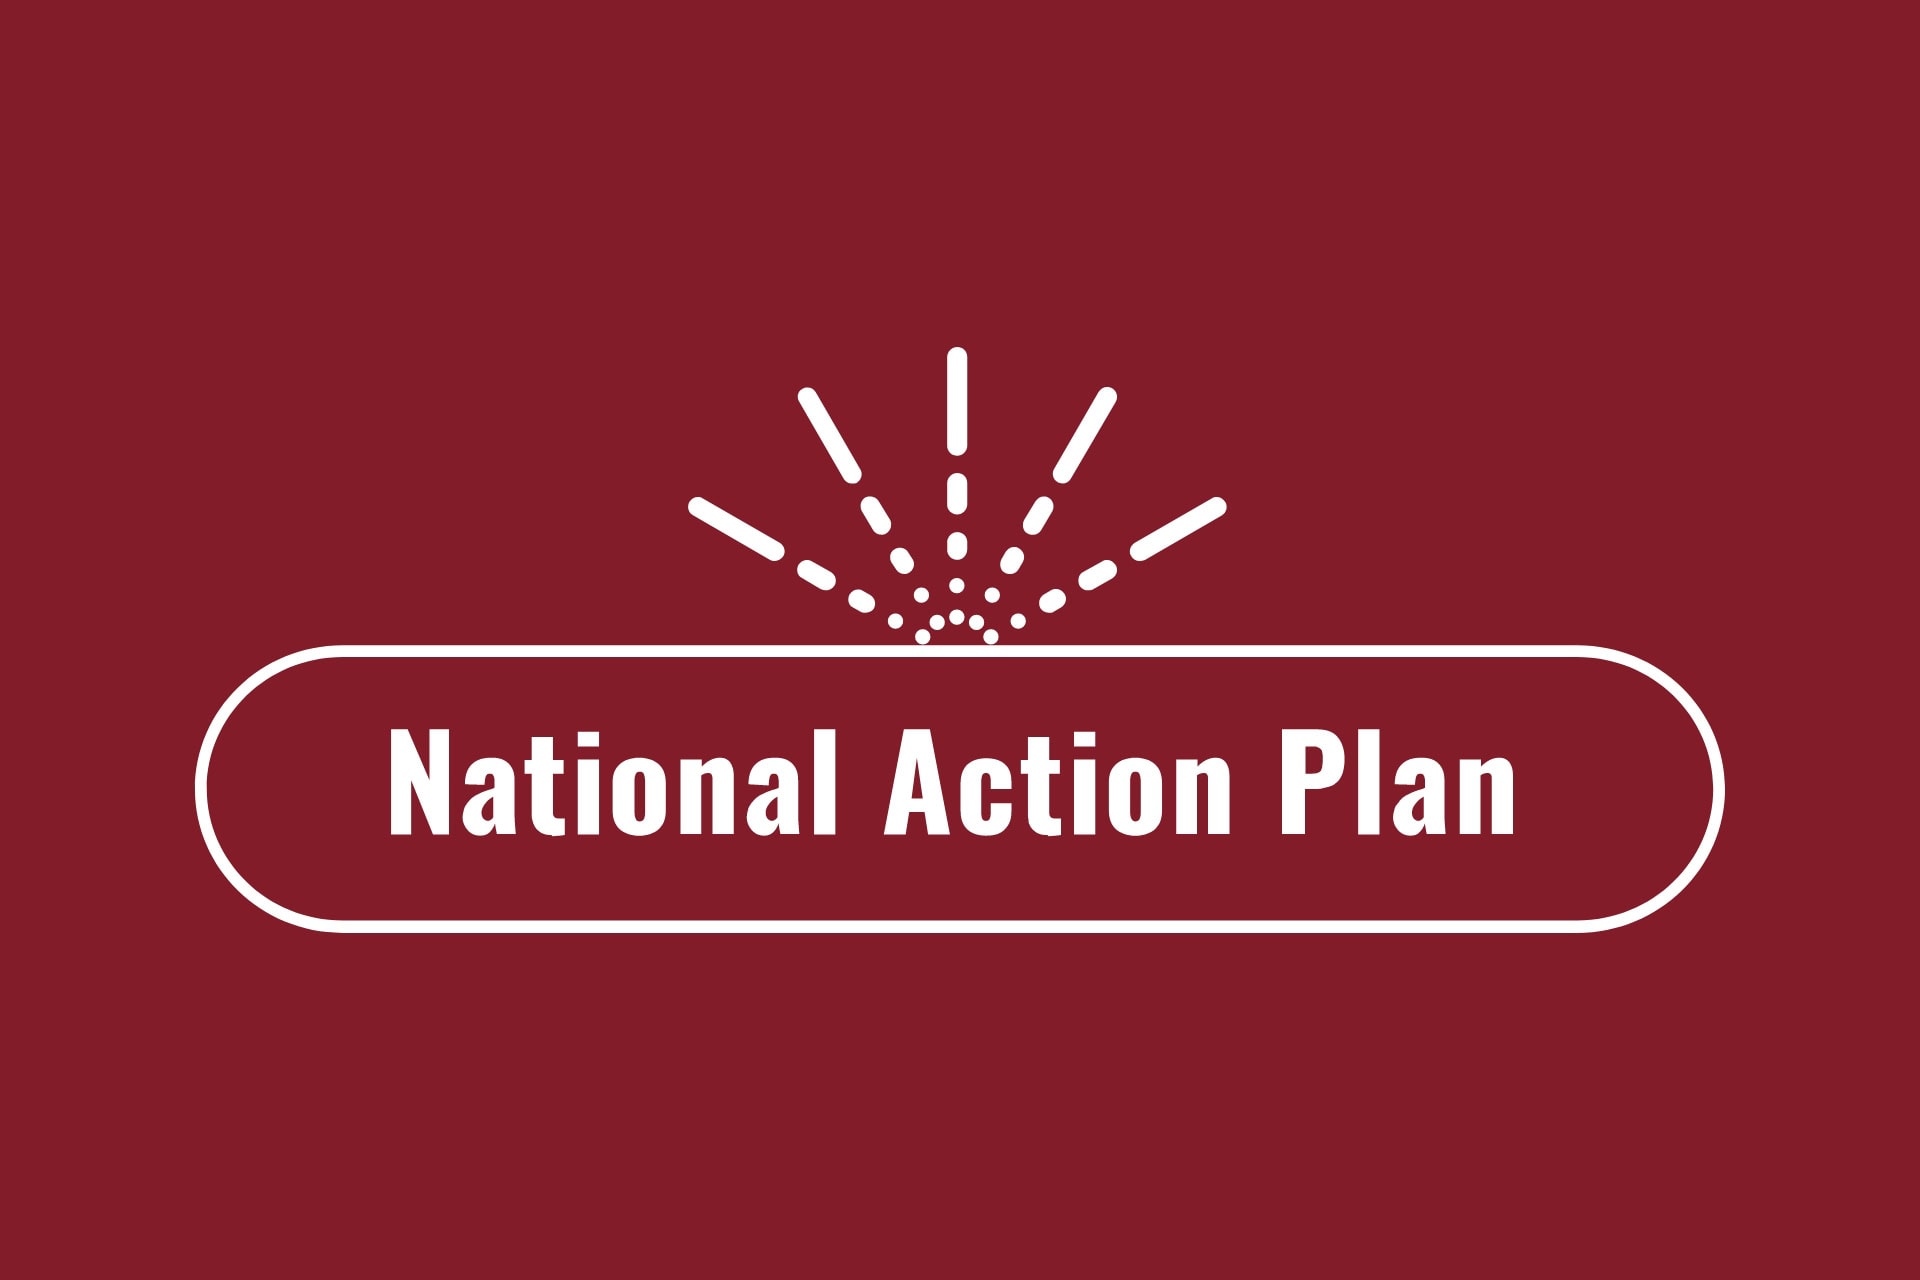 The logo for the National Action Plan is shown.